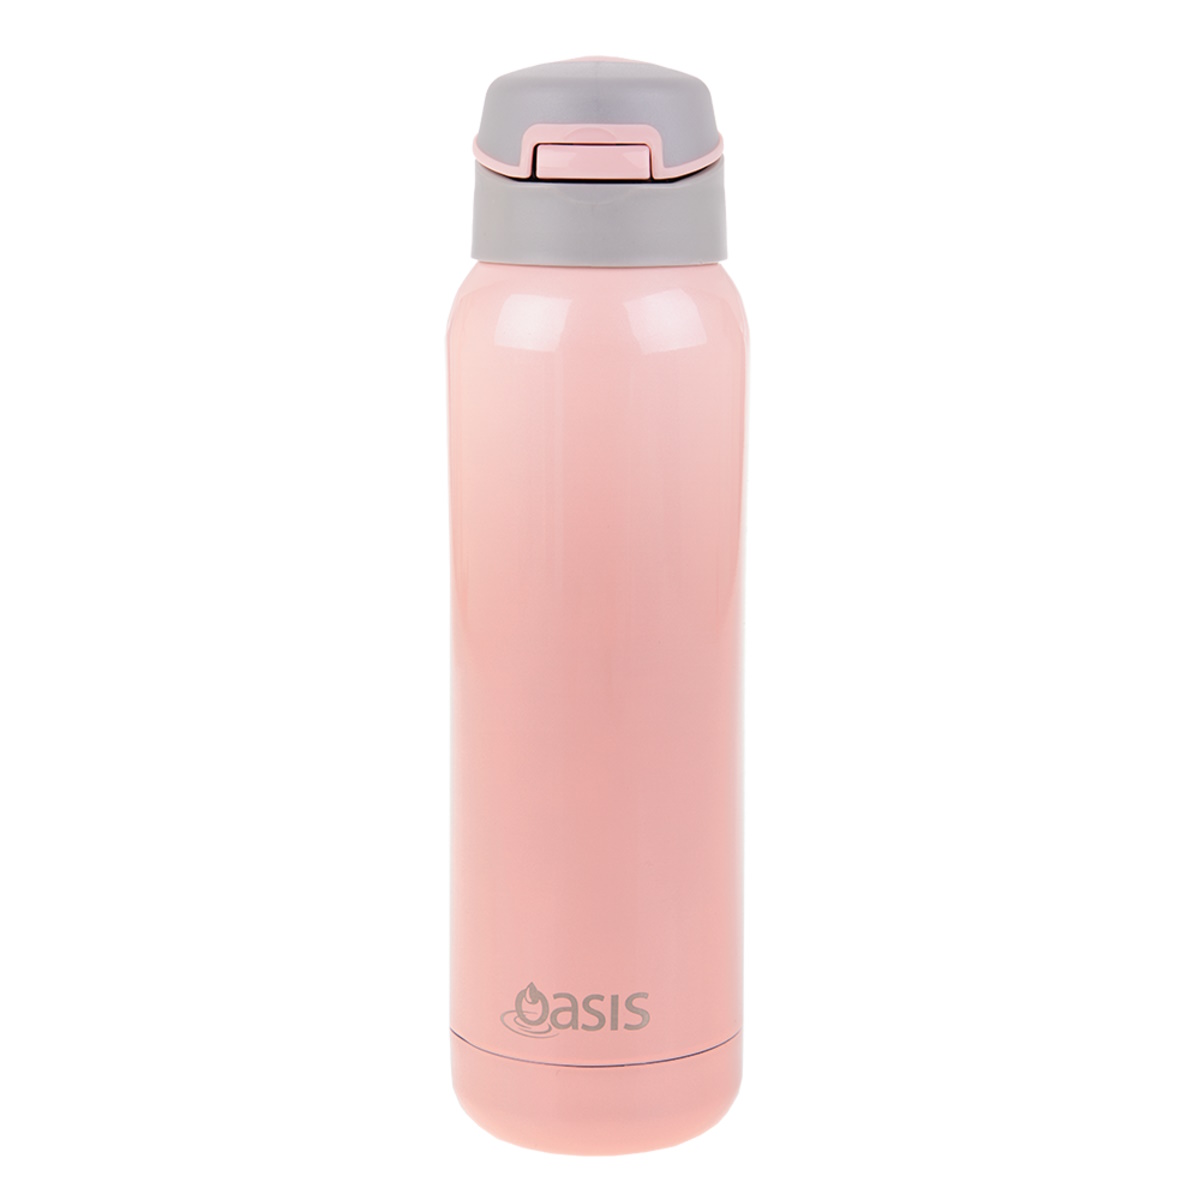 Oasis Stainless Steel Insulated Sports Bottle With Straw 500ml Soft Pink